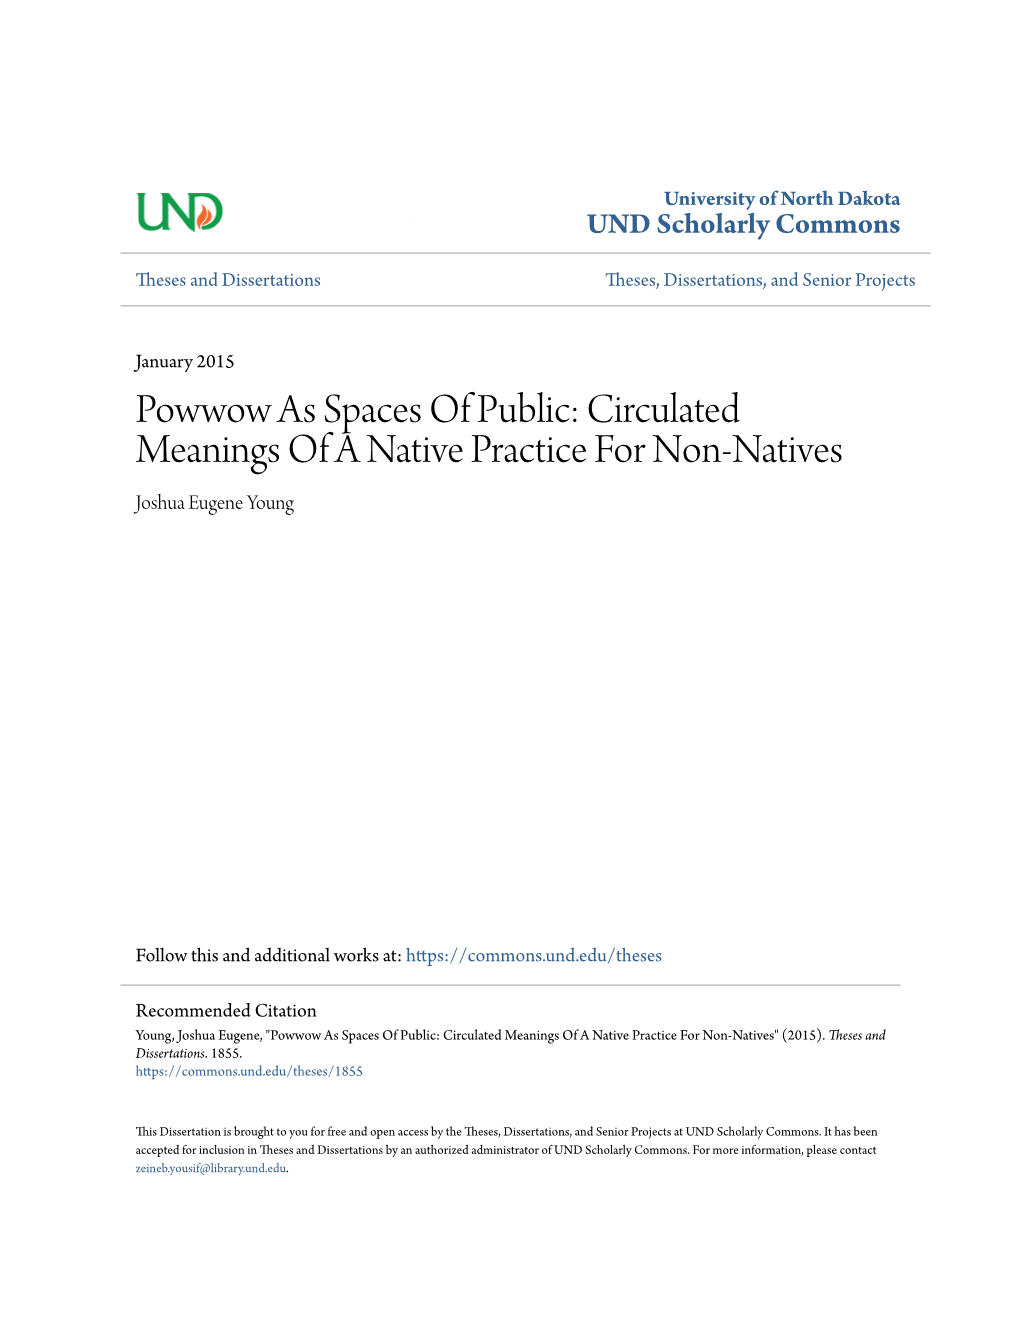 Powwow As Spaces of Public: Circulated Meanings of a Native Practice for Non-Natives Joshua Eugene Young